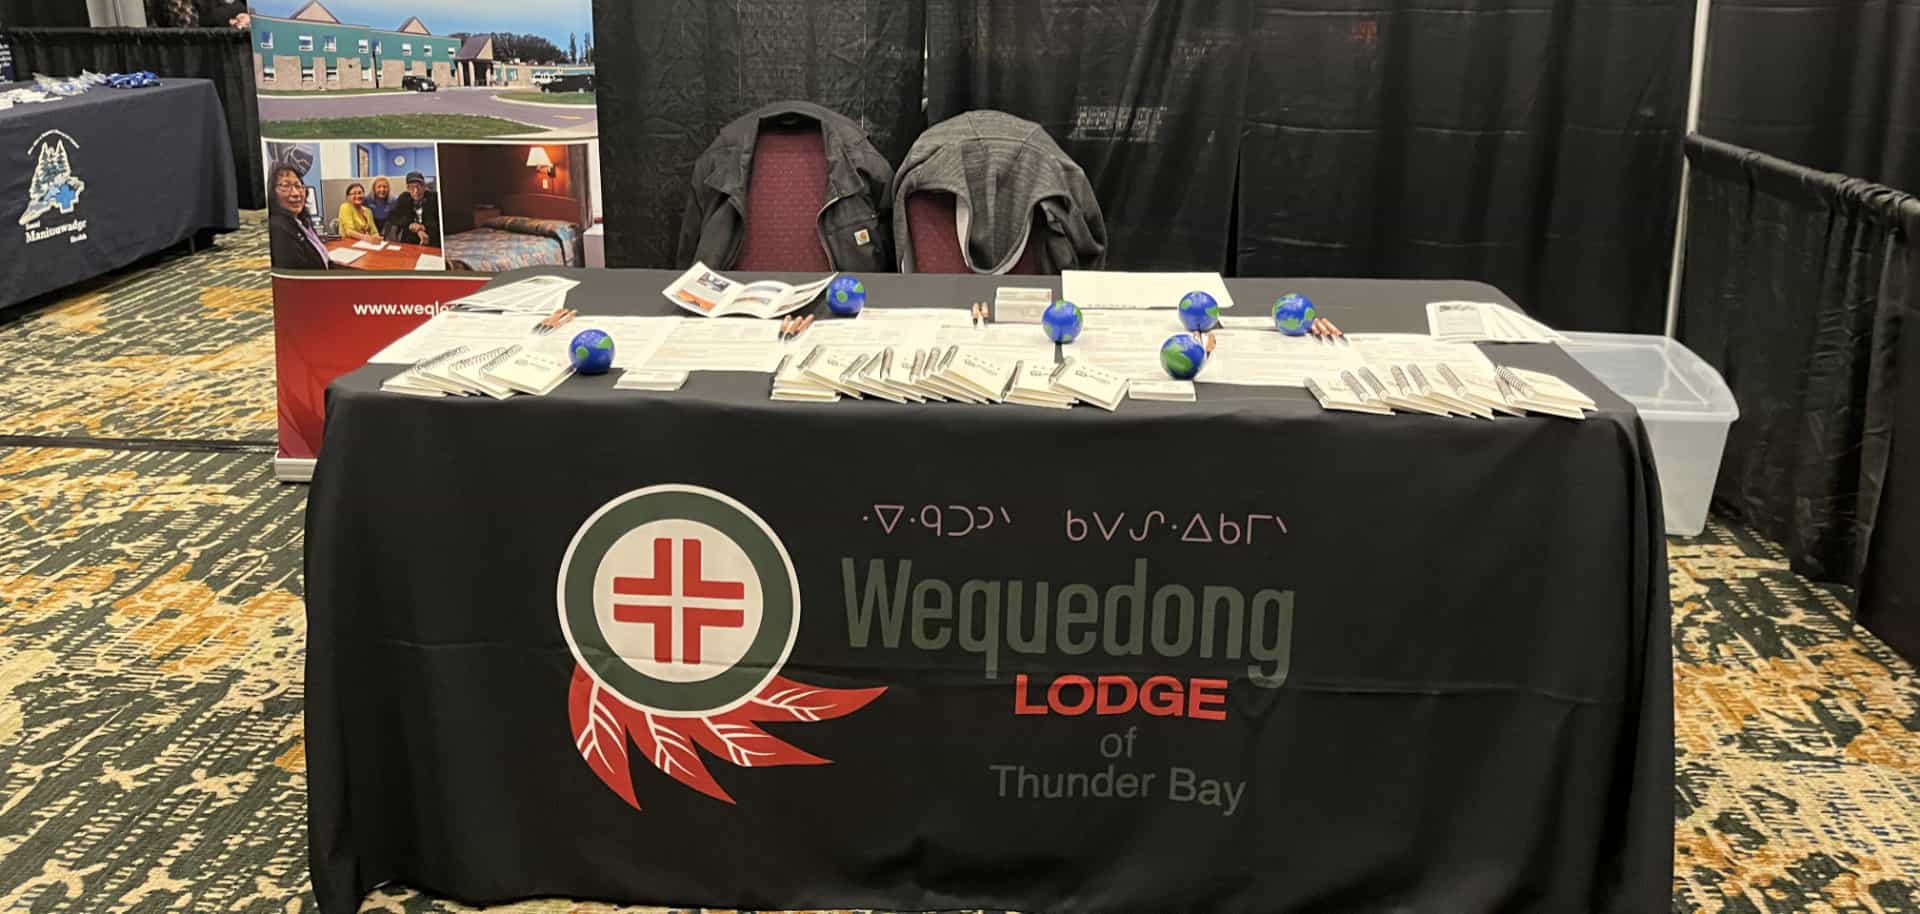 Wequedong Lodge table at a career fair